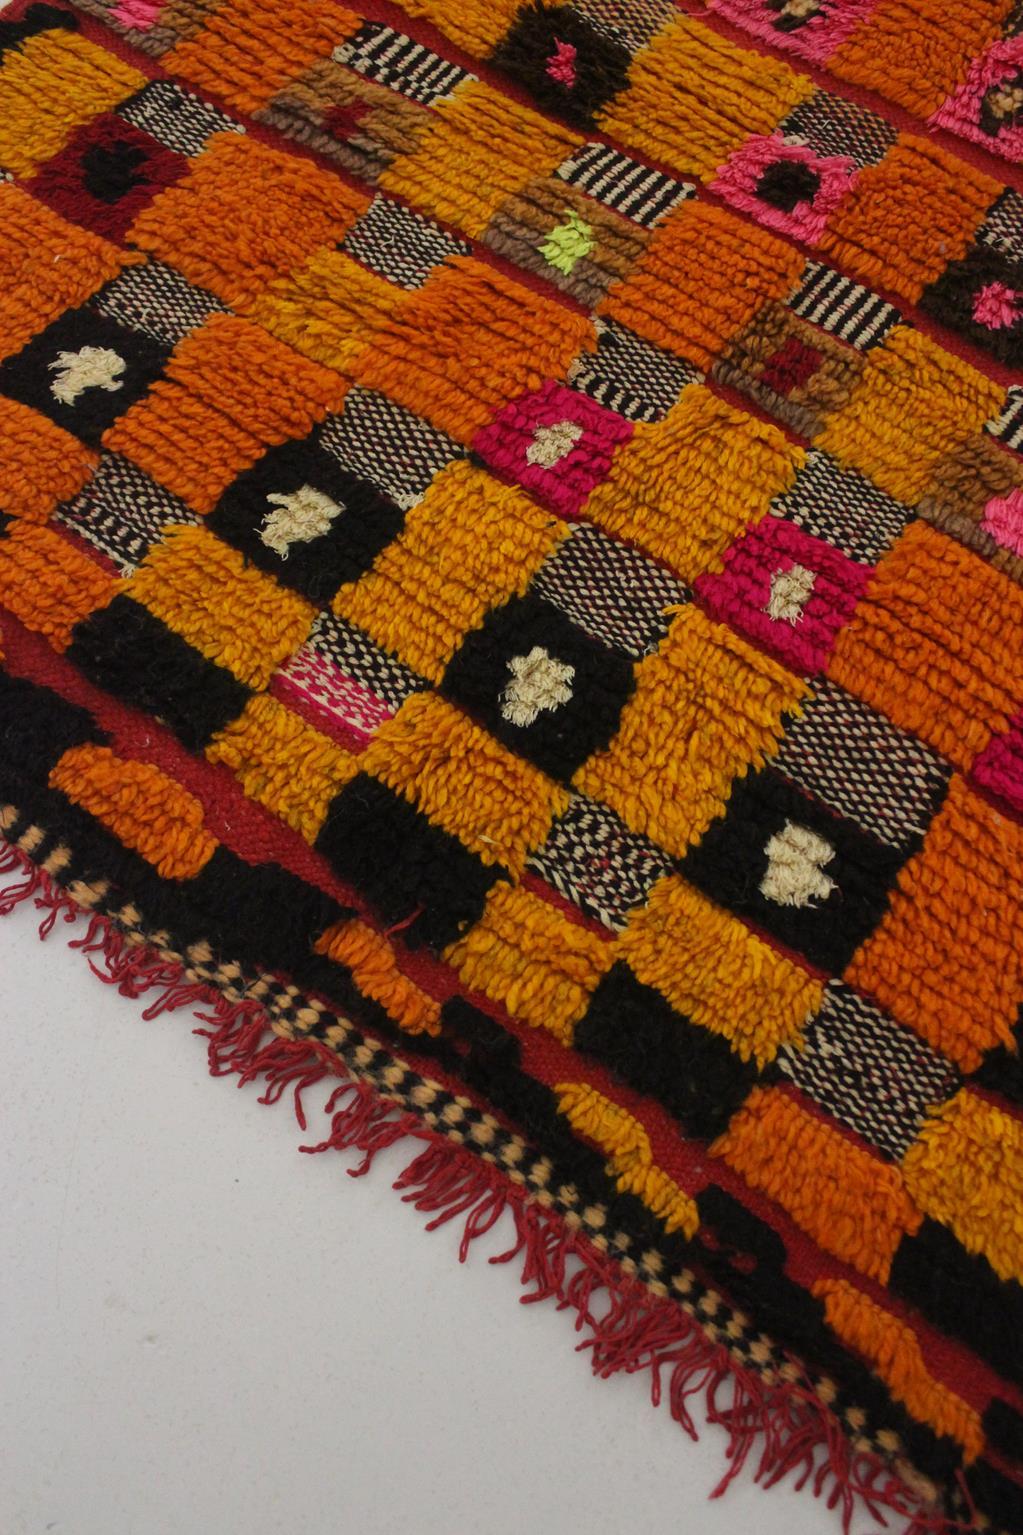 Vintage Moroccan Azilal rug - Red, orange, yellow - 3.3x7.7feet / 102x235cm In Good Condition For Sale In Marrakech, MA